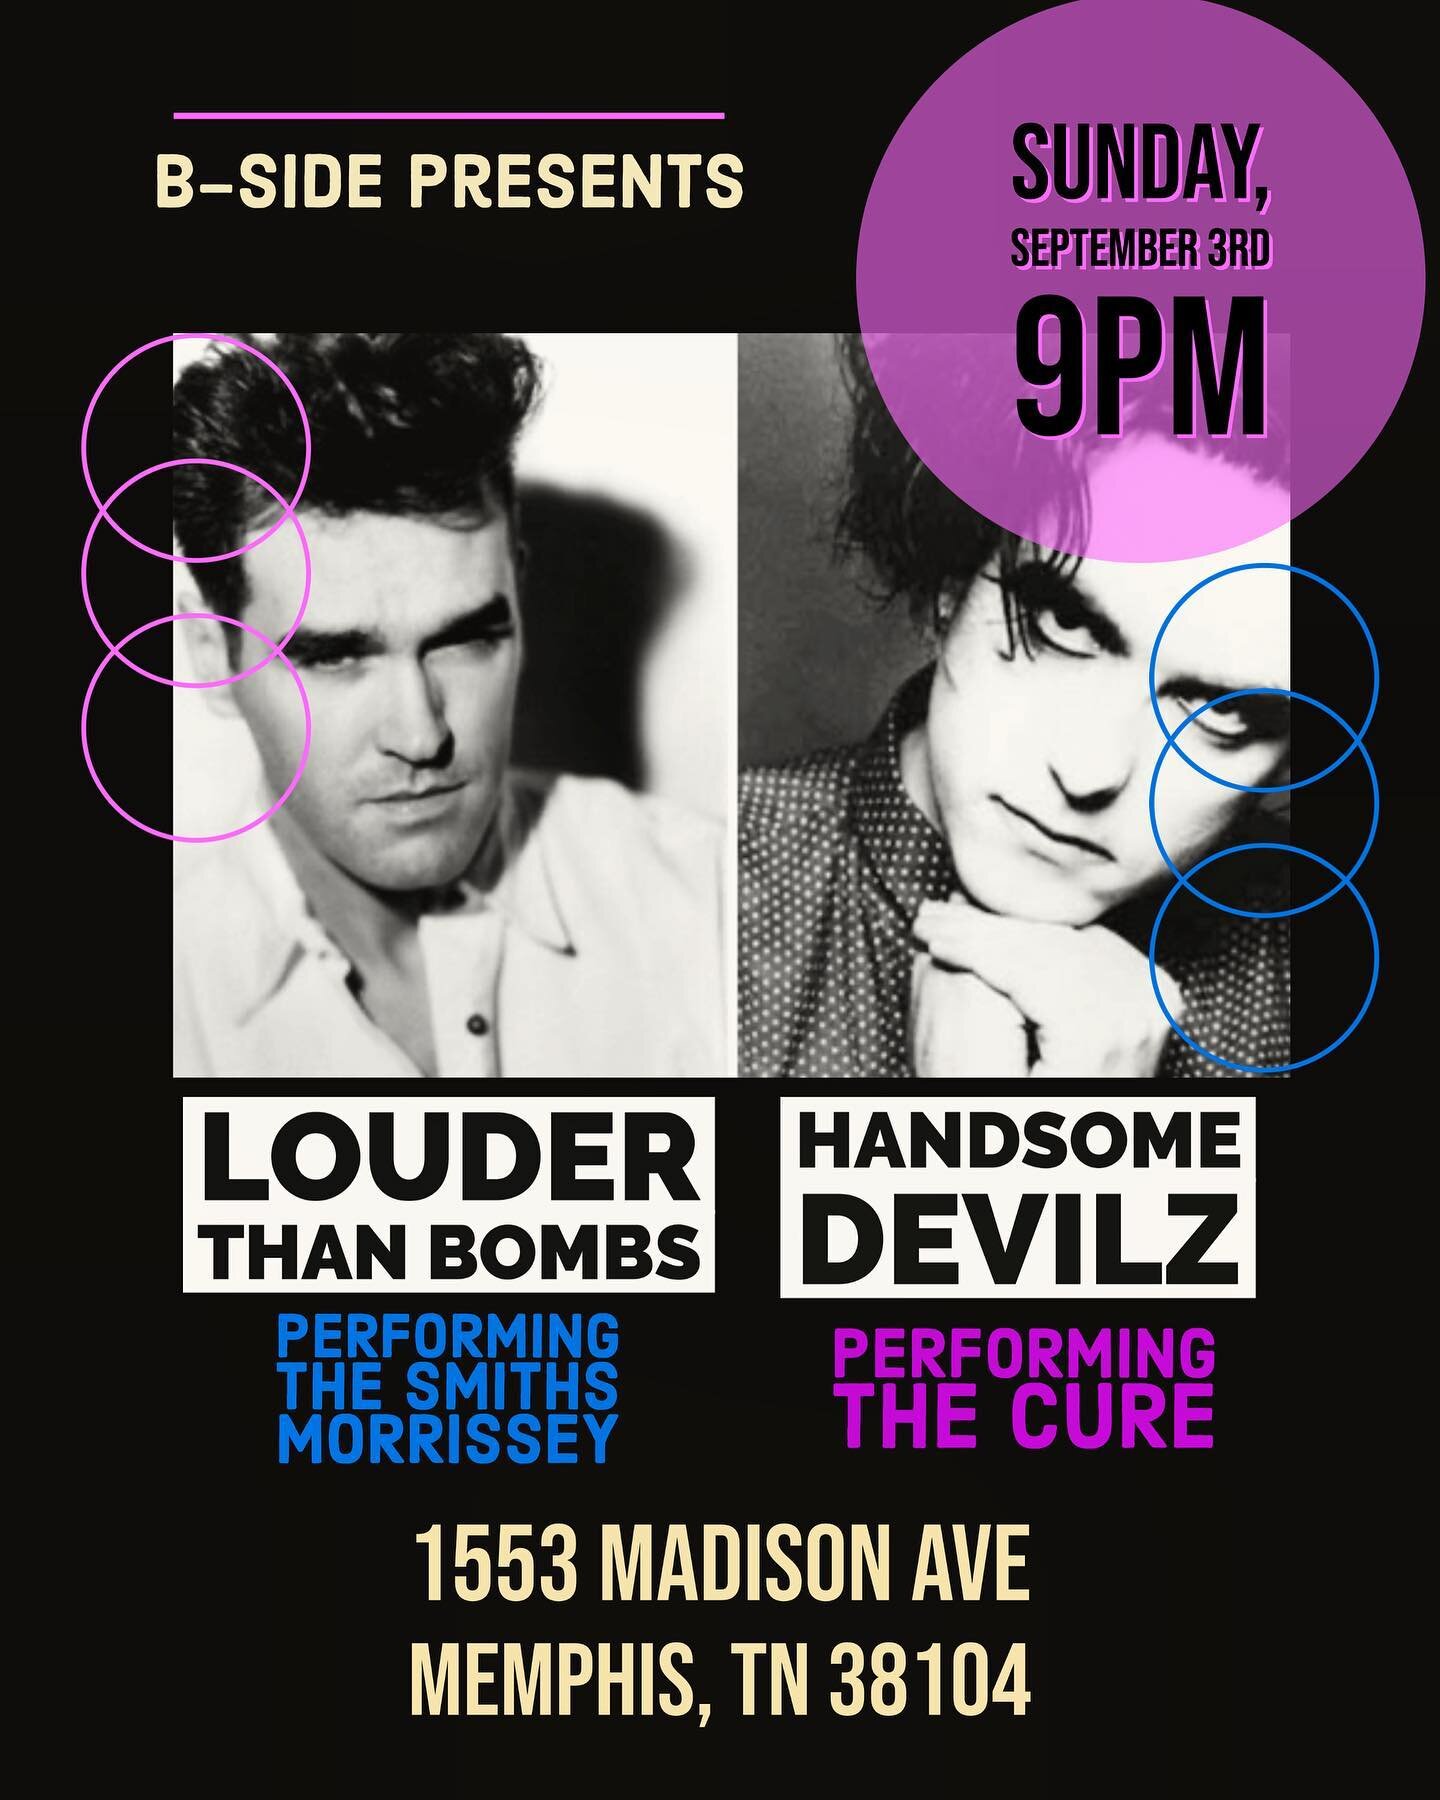 Tonight 9pm @ltbmemphis @handsomedevilzchicago @bsidememphis #thesmiths #morrissey #thecure